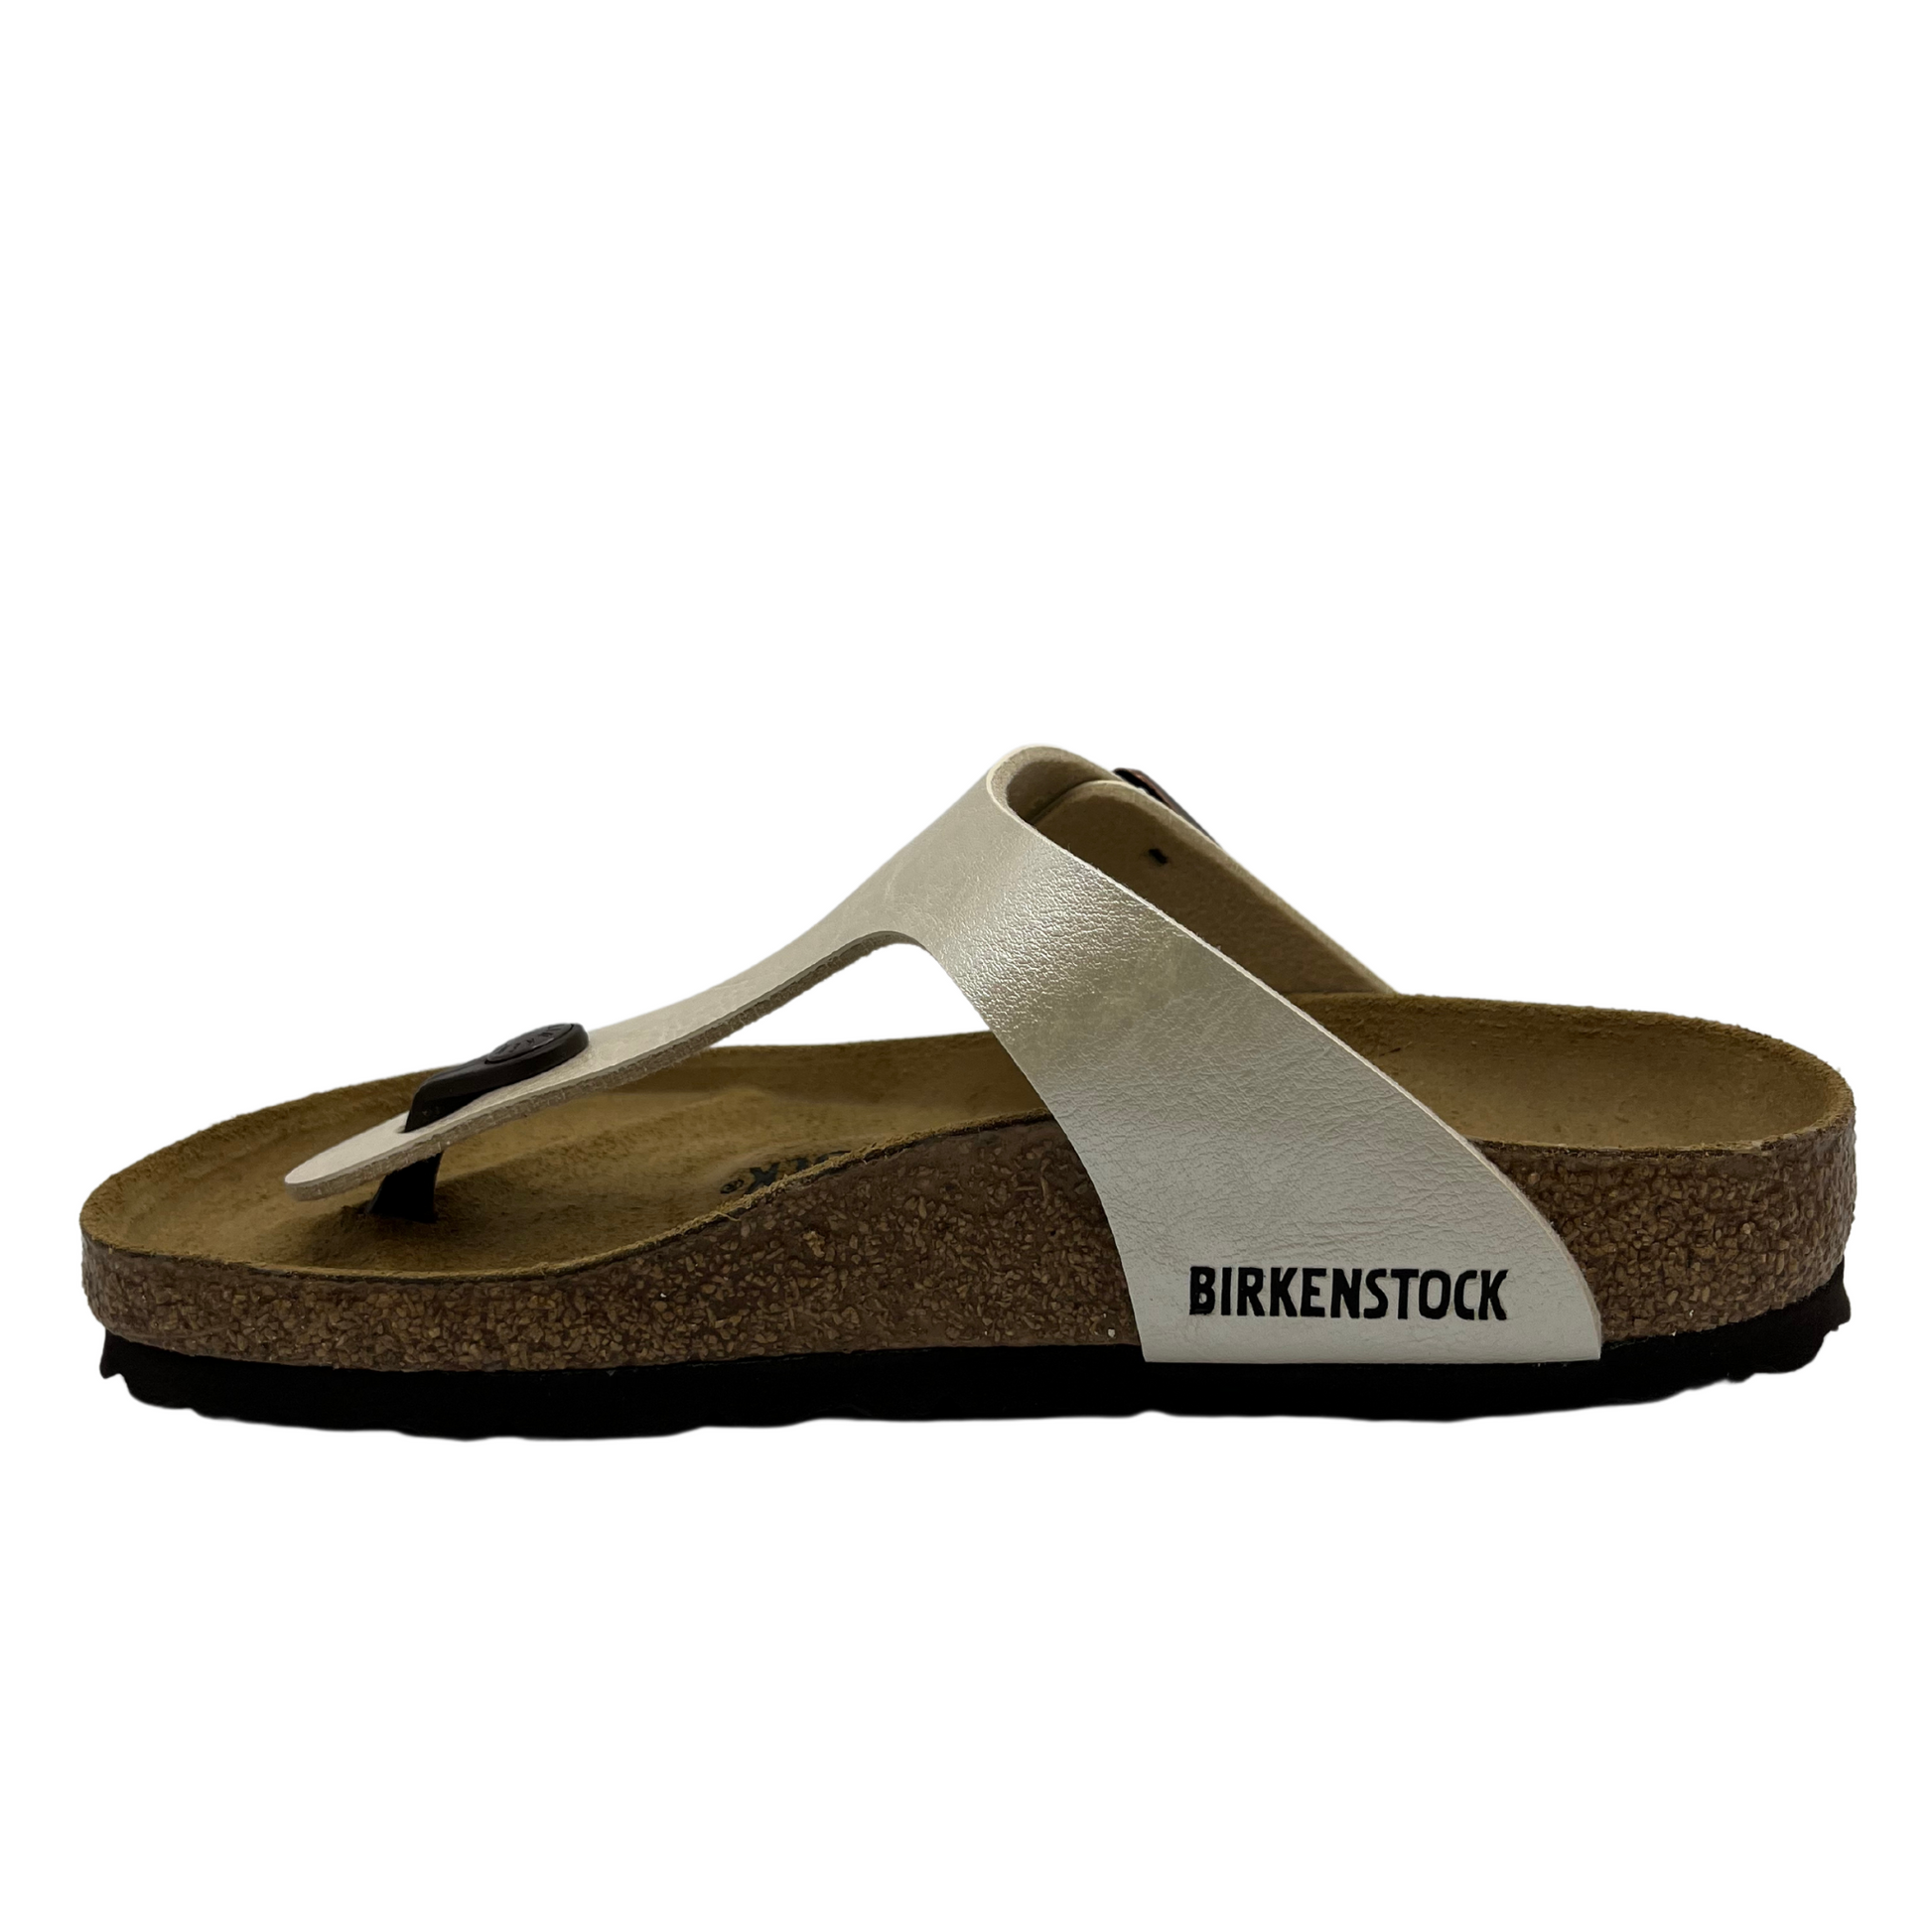 Left facing view of synthetic leather thong sandal with bronze buckle strap and suede lined contoured footbed.